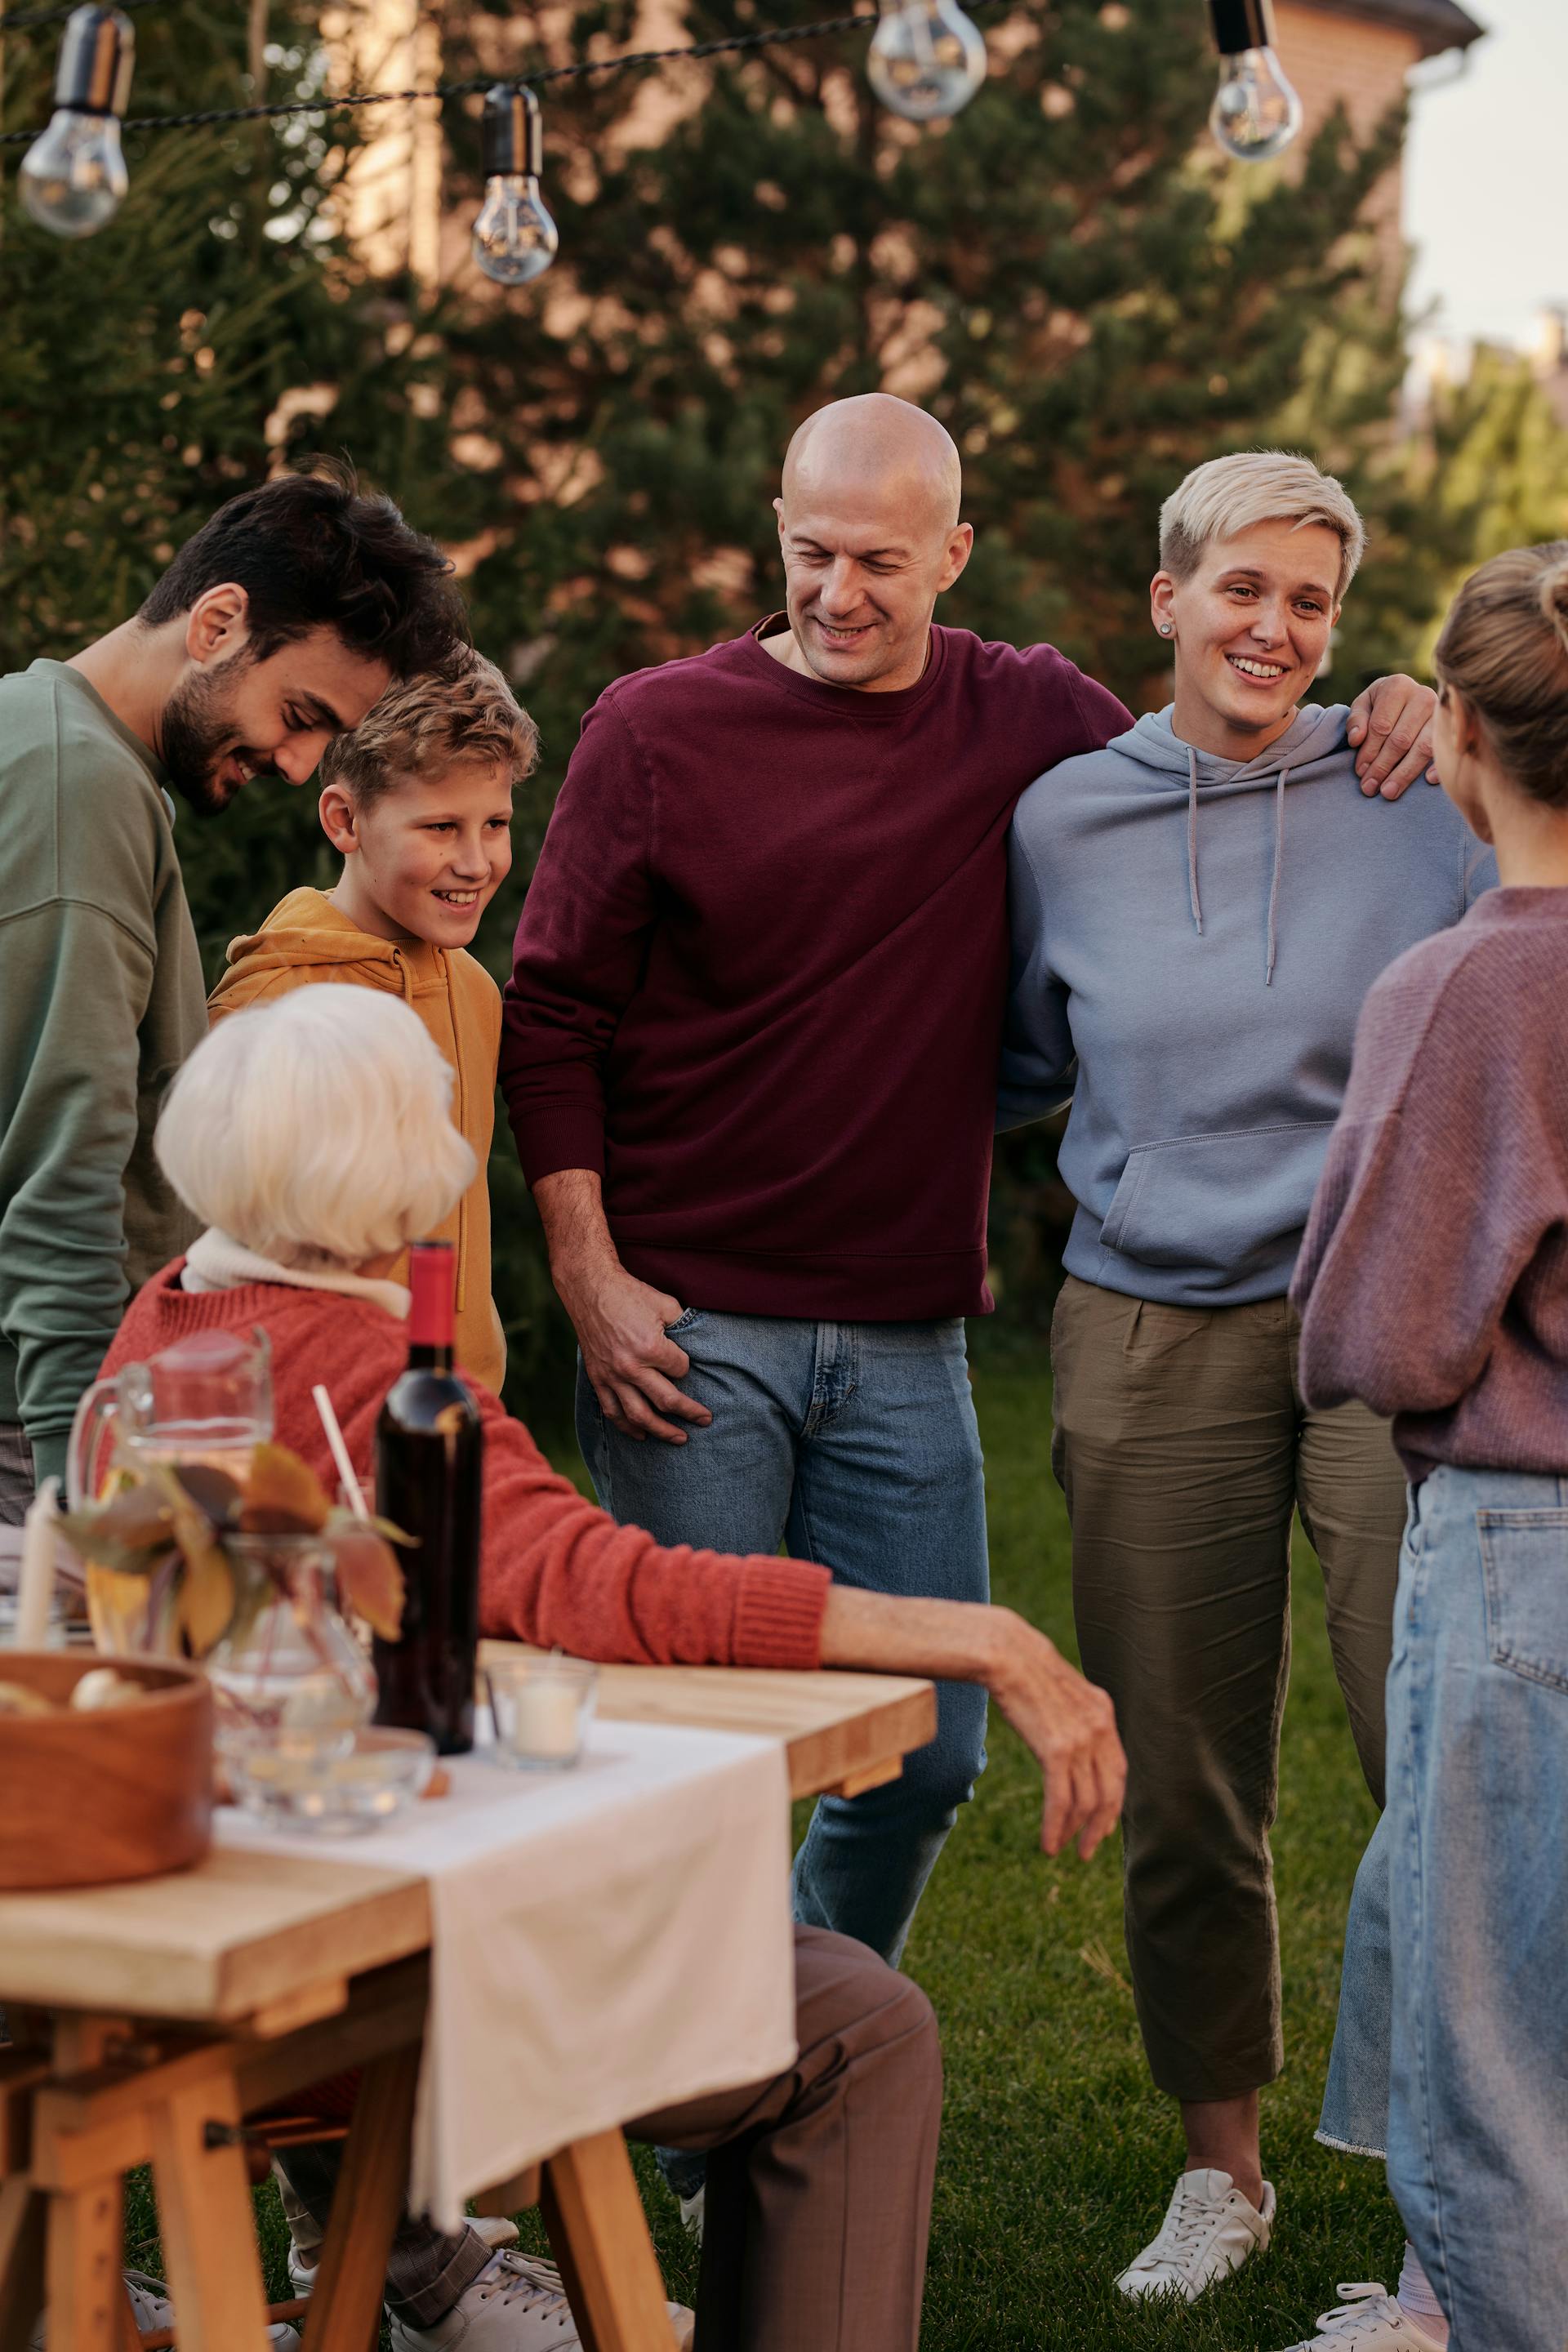 People standing around a table outside | Source: Pexels